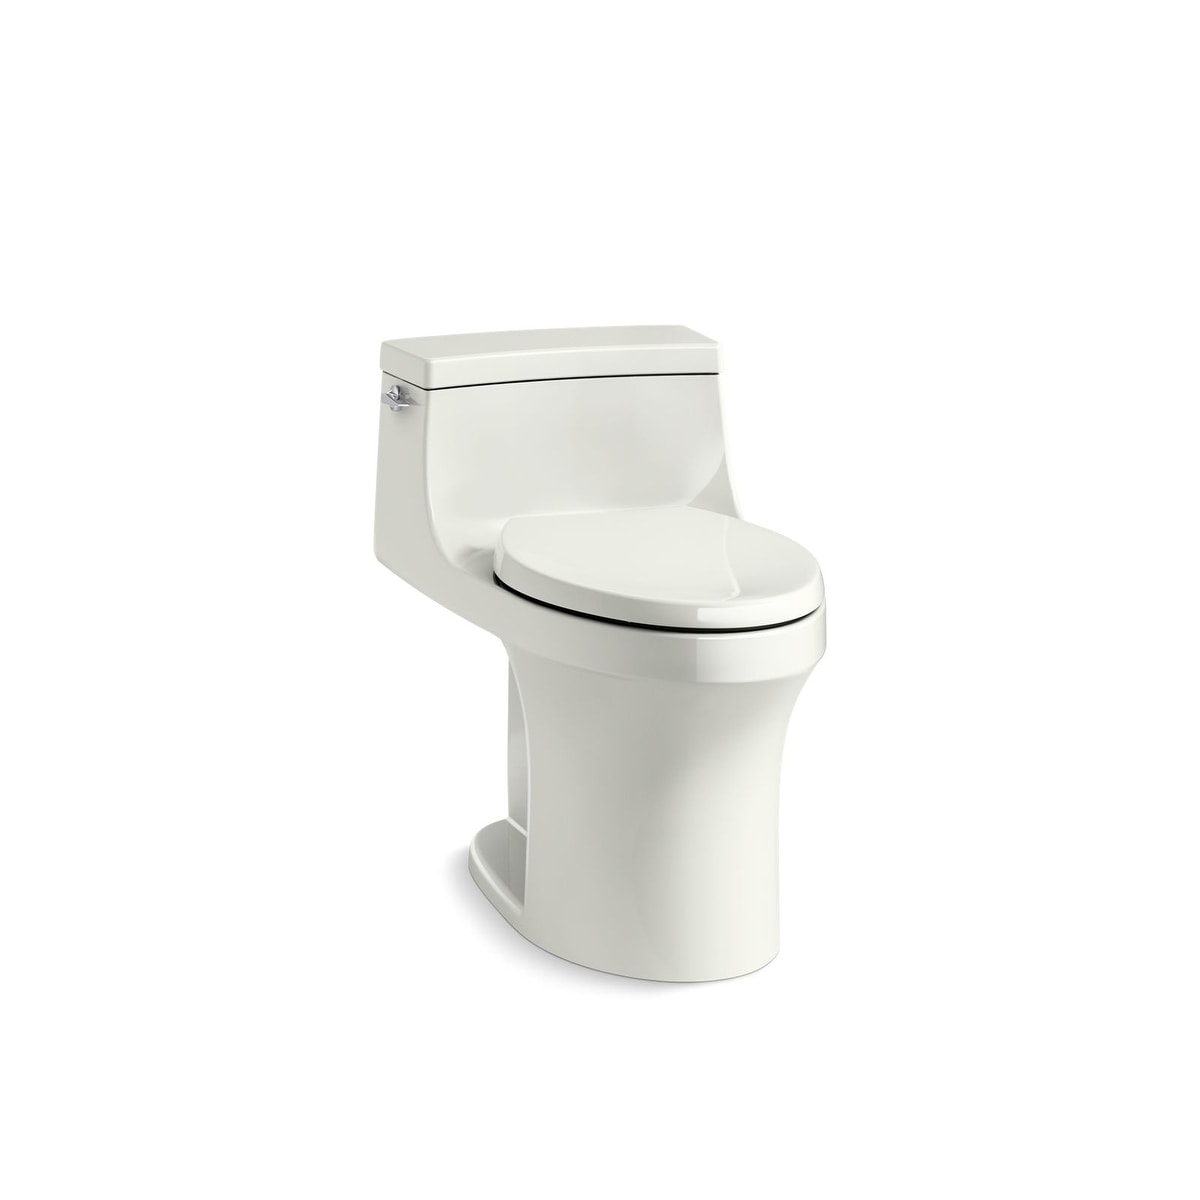 https://ak1.ostkcdn.com/images/products/21506862/Kohler-K-5172-San-Souci-Comfort-Height-One-Piece-Compact-Elongated-1.28-GPF-Toilet-With-AquaPiston-Flushing-Technology-And-Seat-08f55be8-593d-406b-a9d4-2637bf4b6eff.jpg